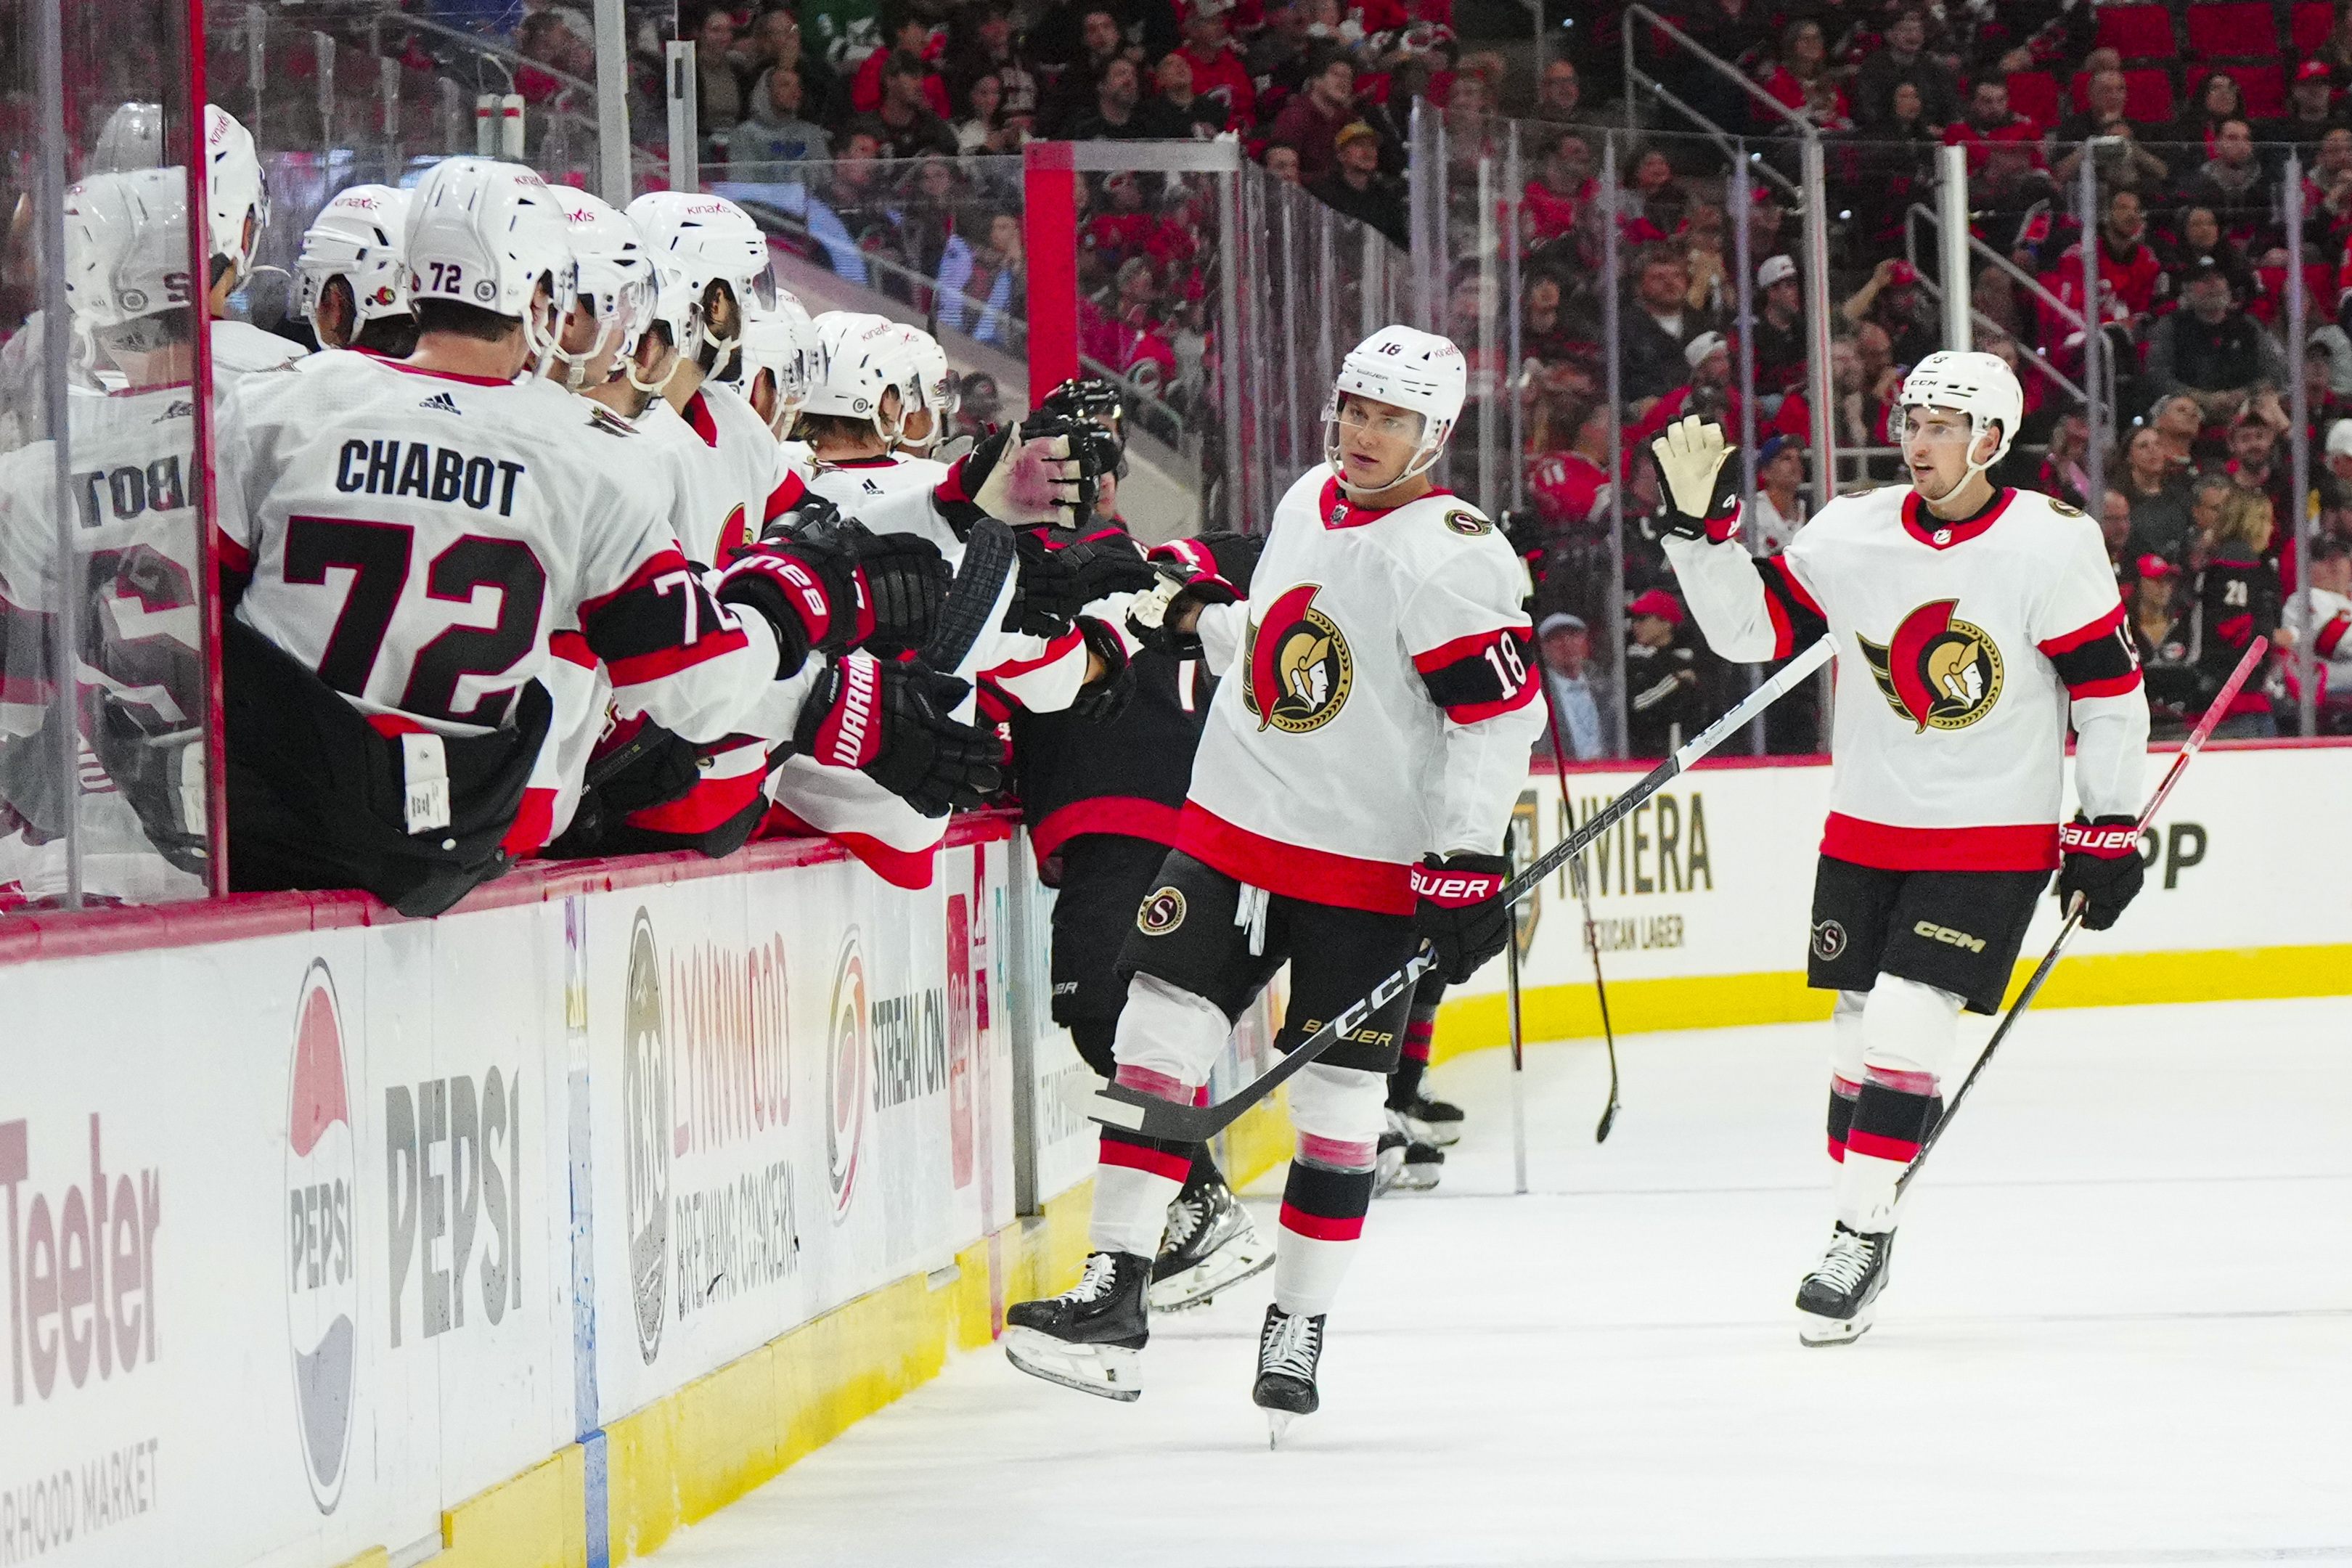 Third-period surge lifts Hurricanes past Senators - The Rink Live   Comprehensive coverage of youth, junior, high school and college hockey